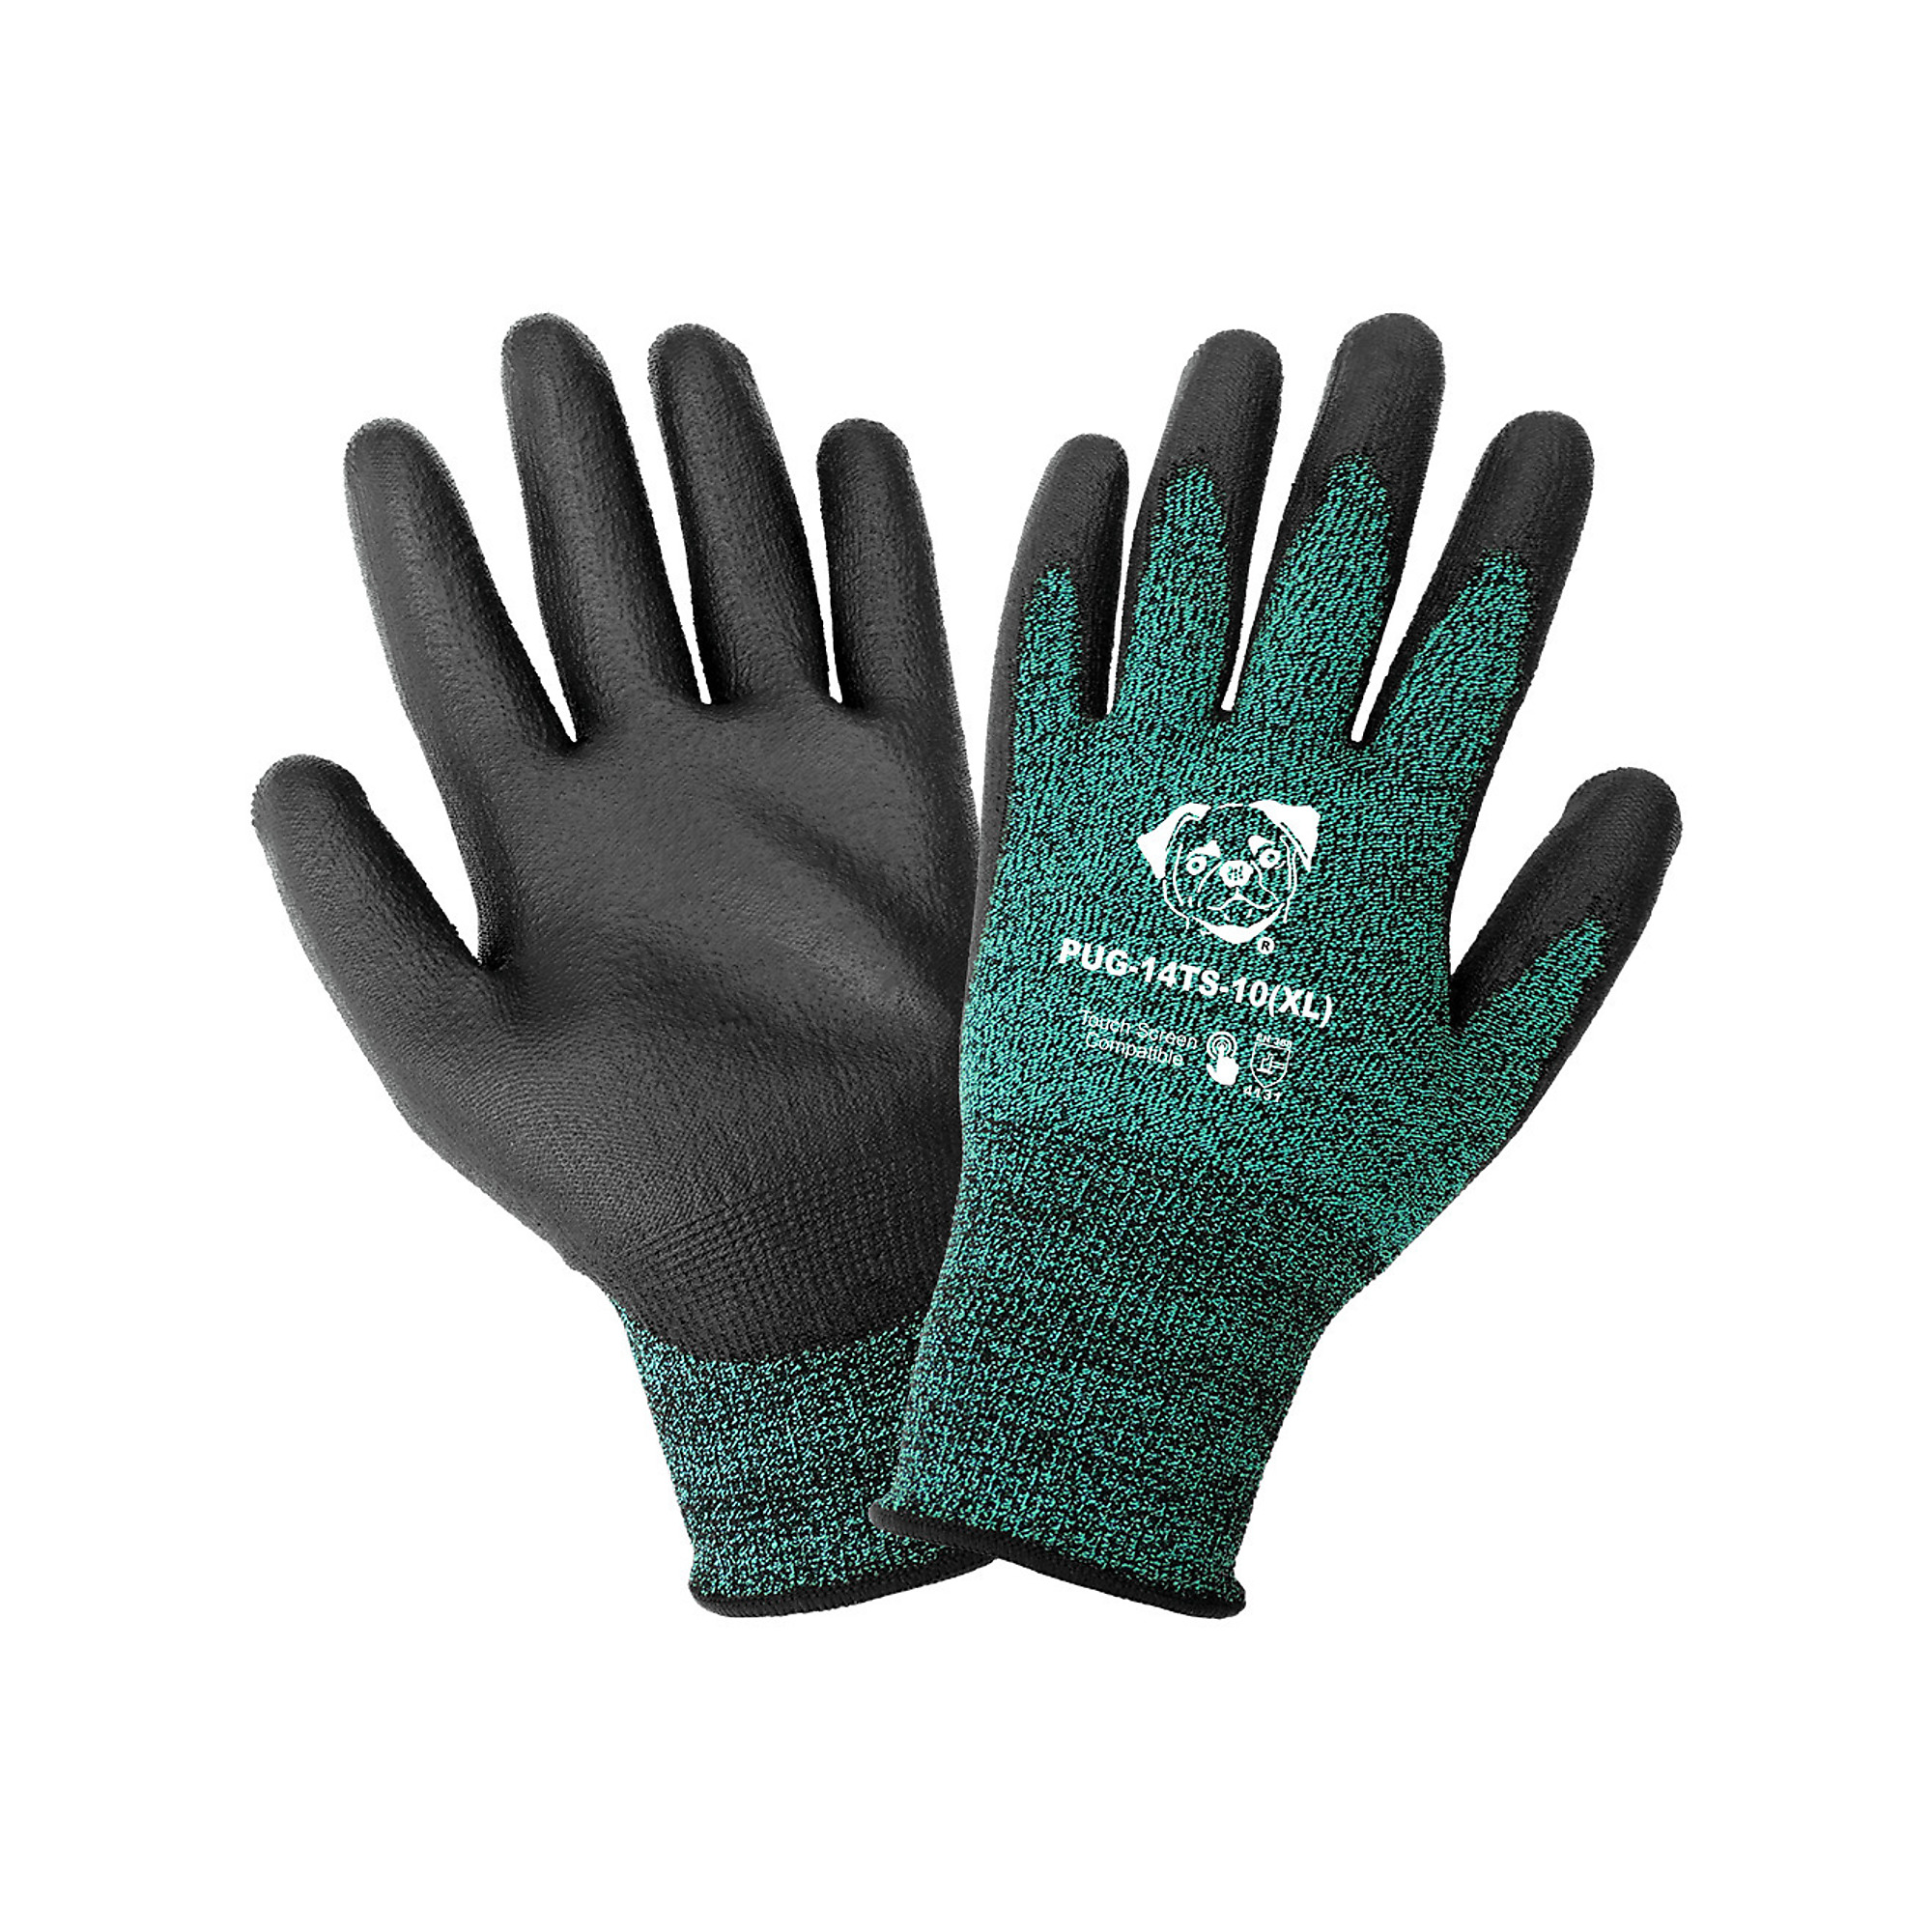 Global Glove PUG , Green, Poly Coated, Cut Resis A1 Tch Scrn Gloves - 12 Pairs, Size L, Color Green/Black, Included (qty.) 12 Model PUG-14TS-9(L)